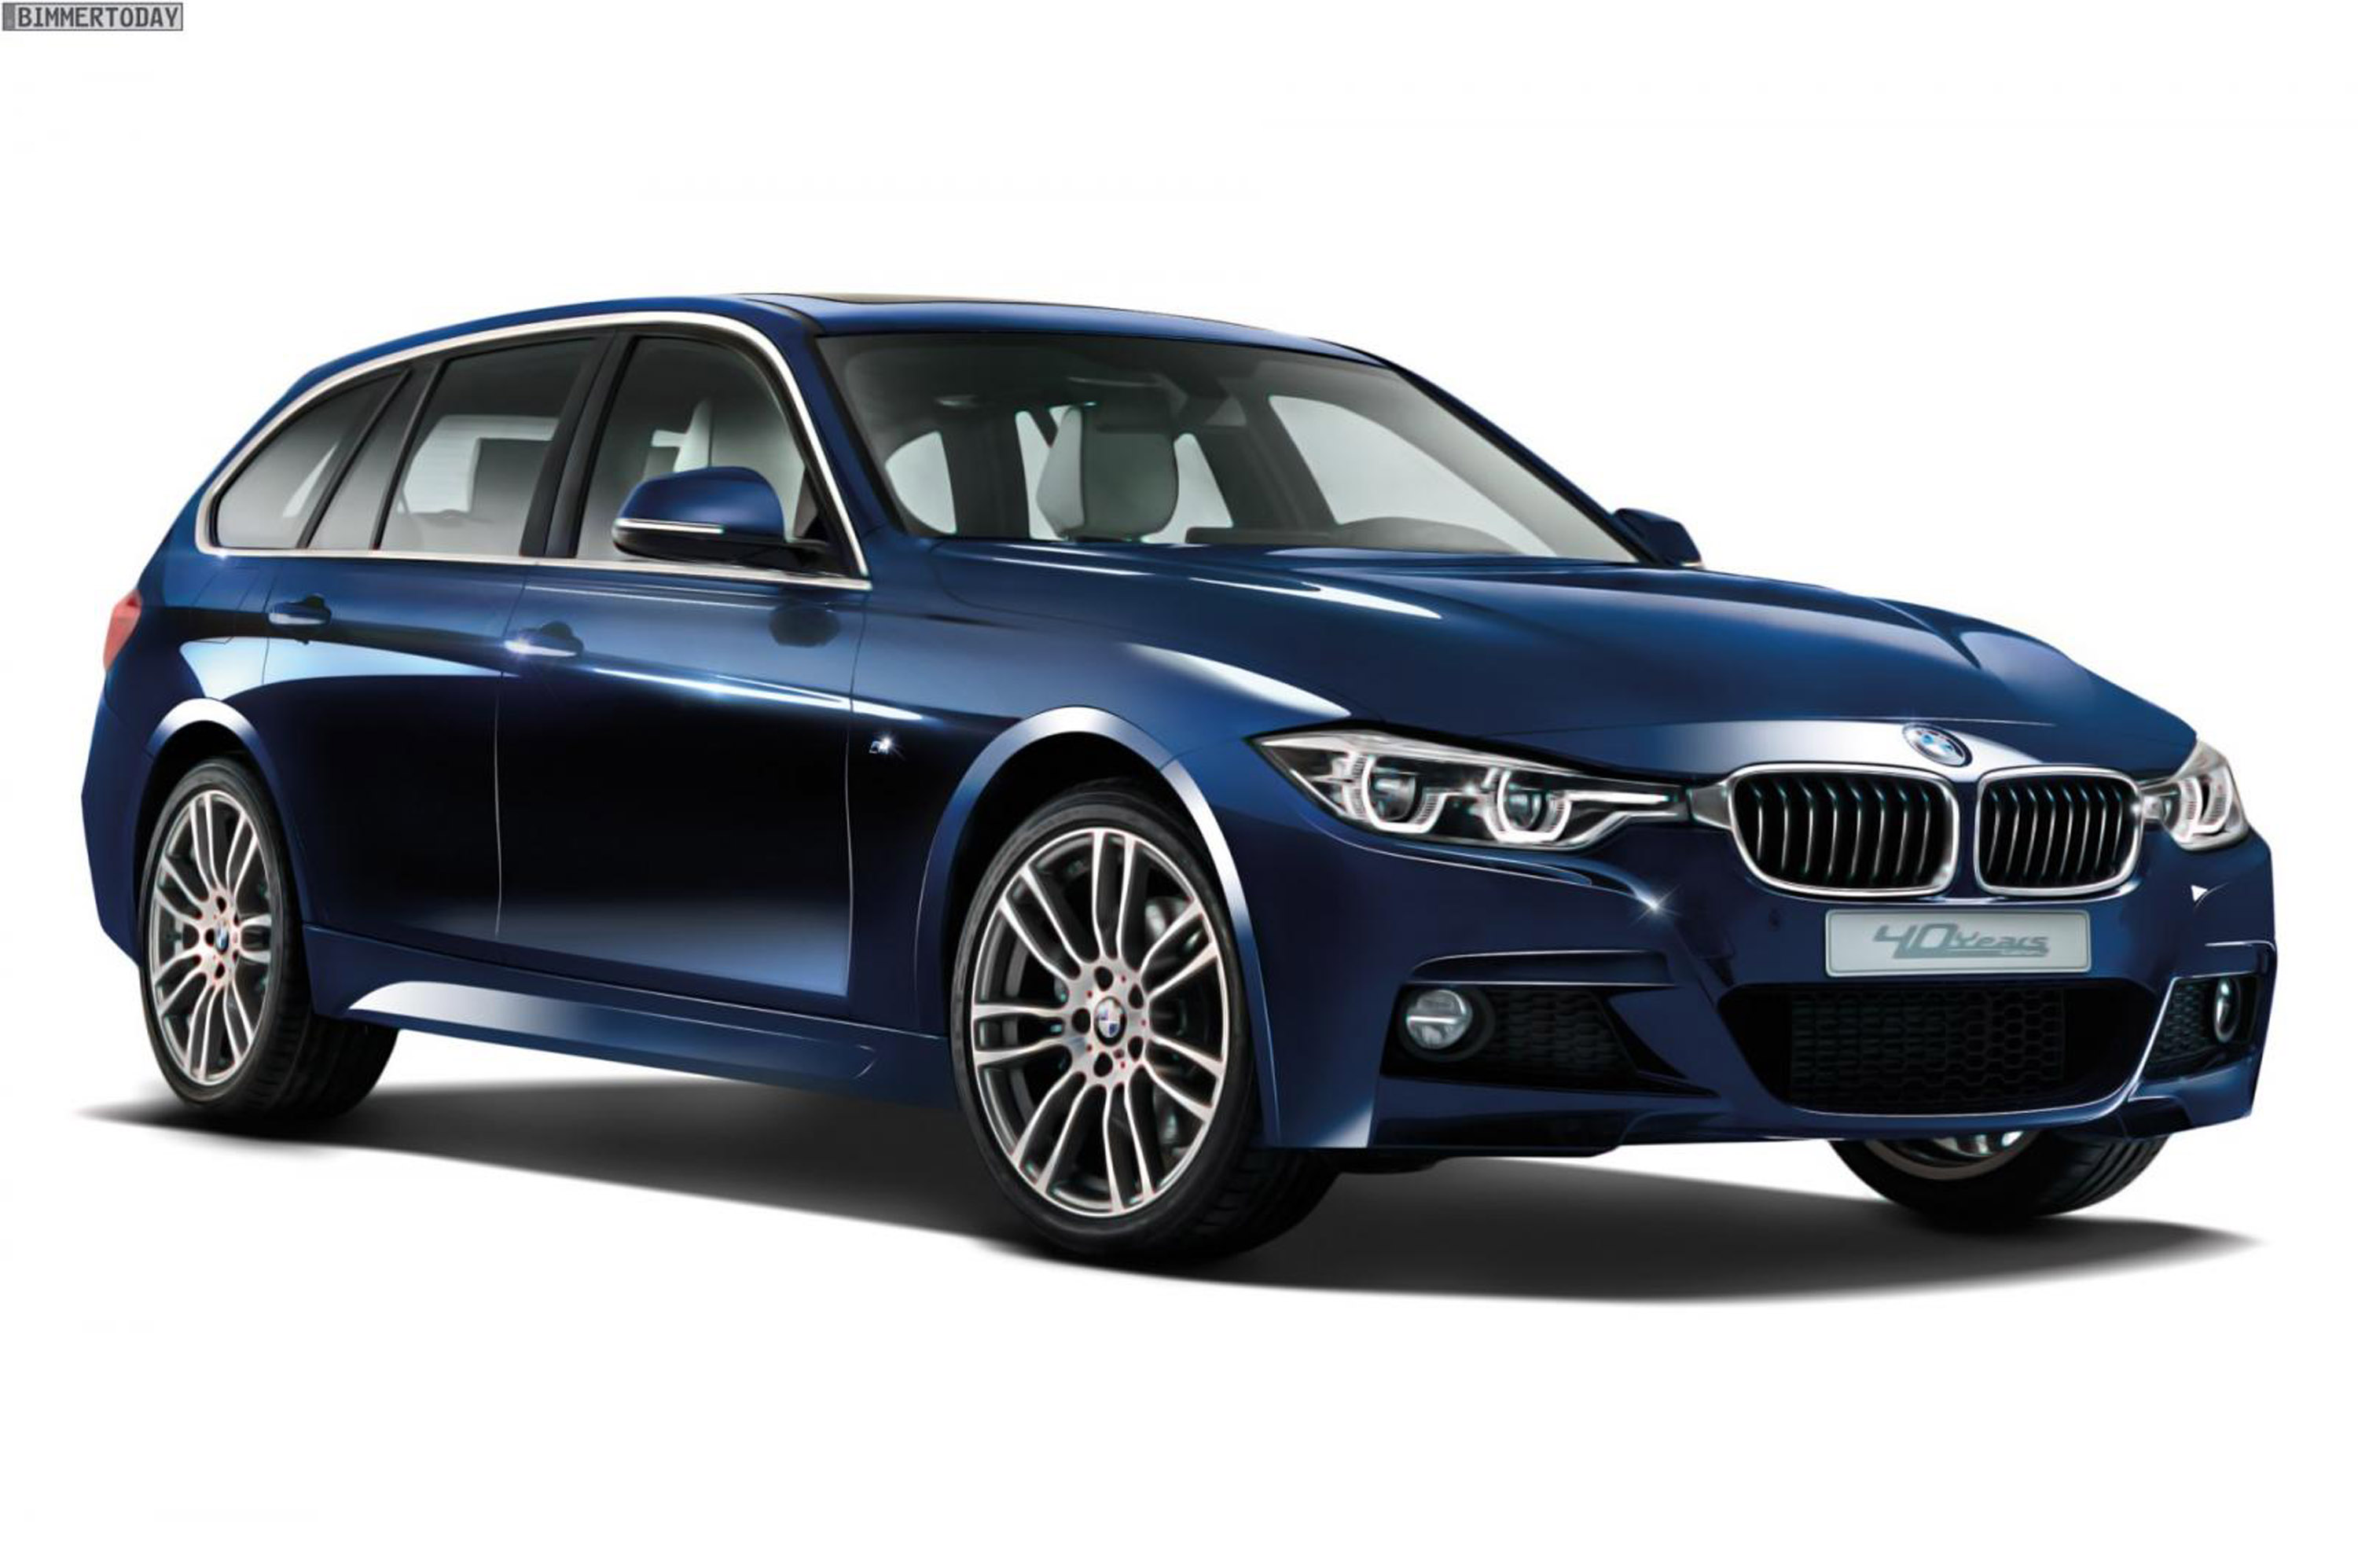 BMW 320d xDrive Touring 40 Years Edition